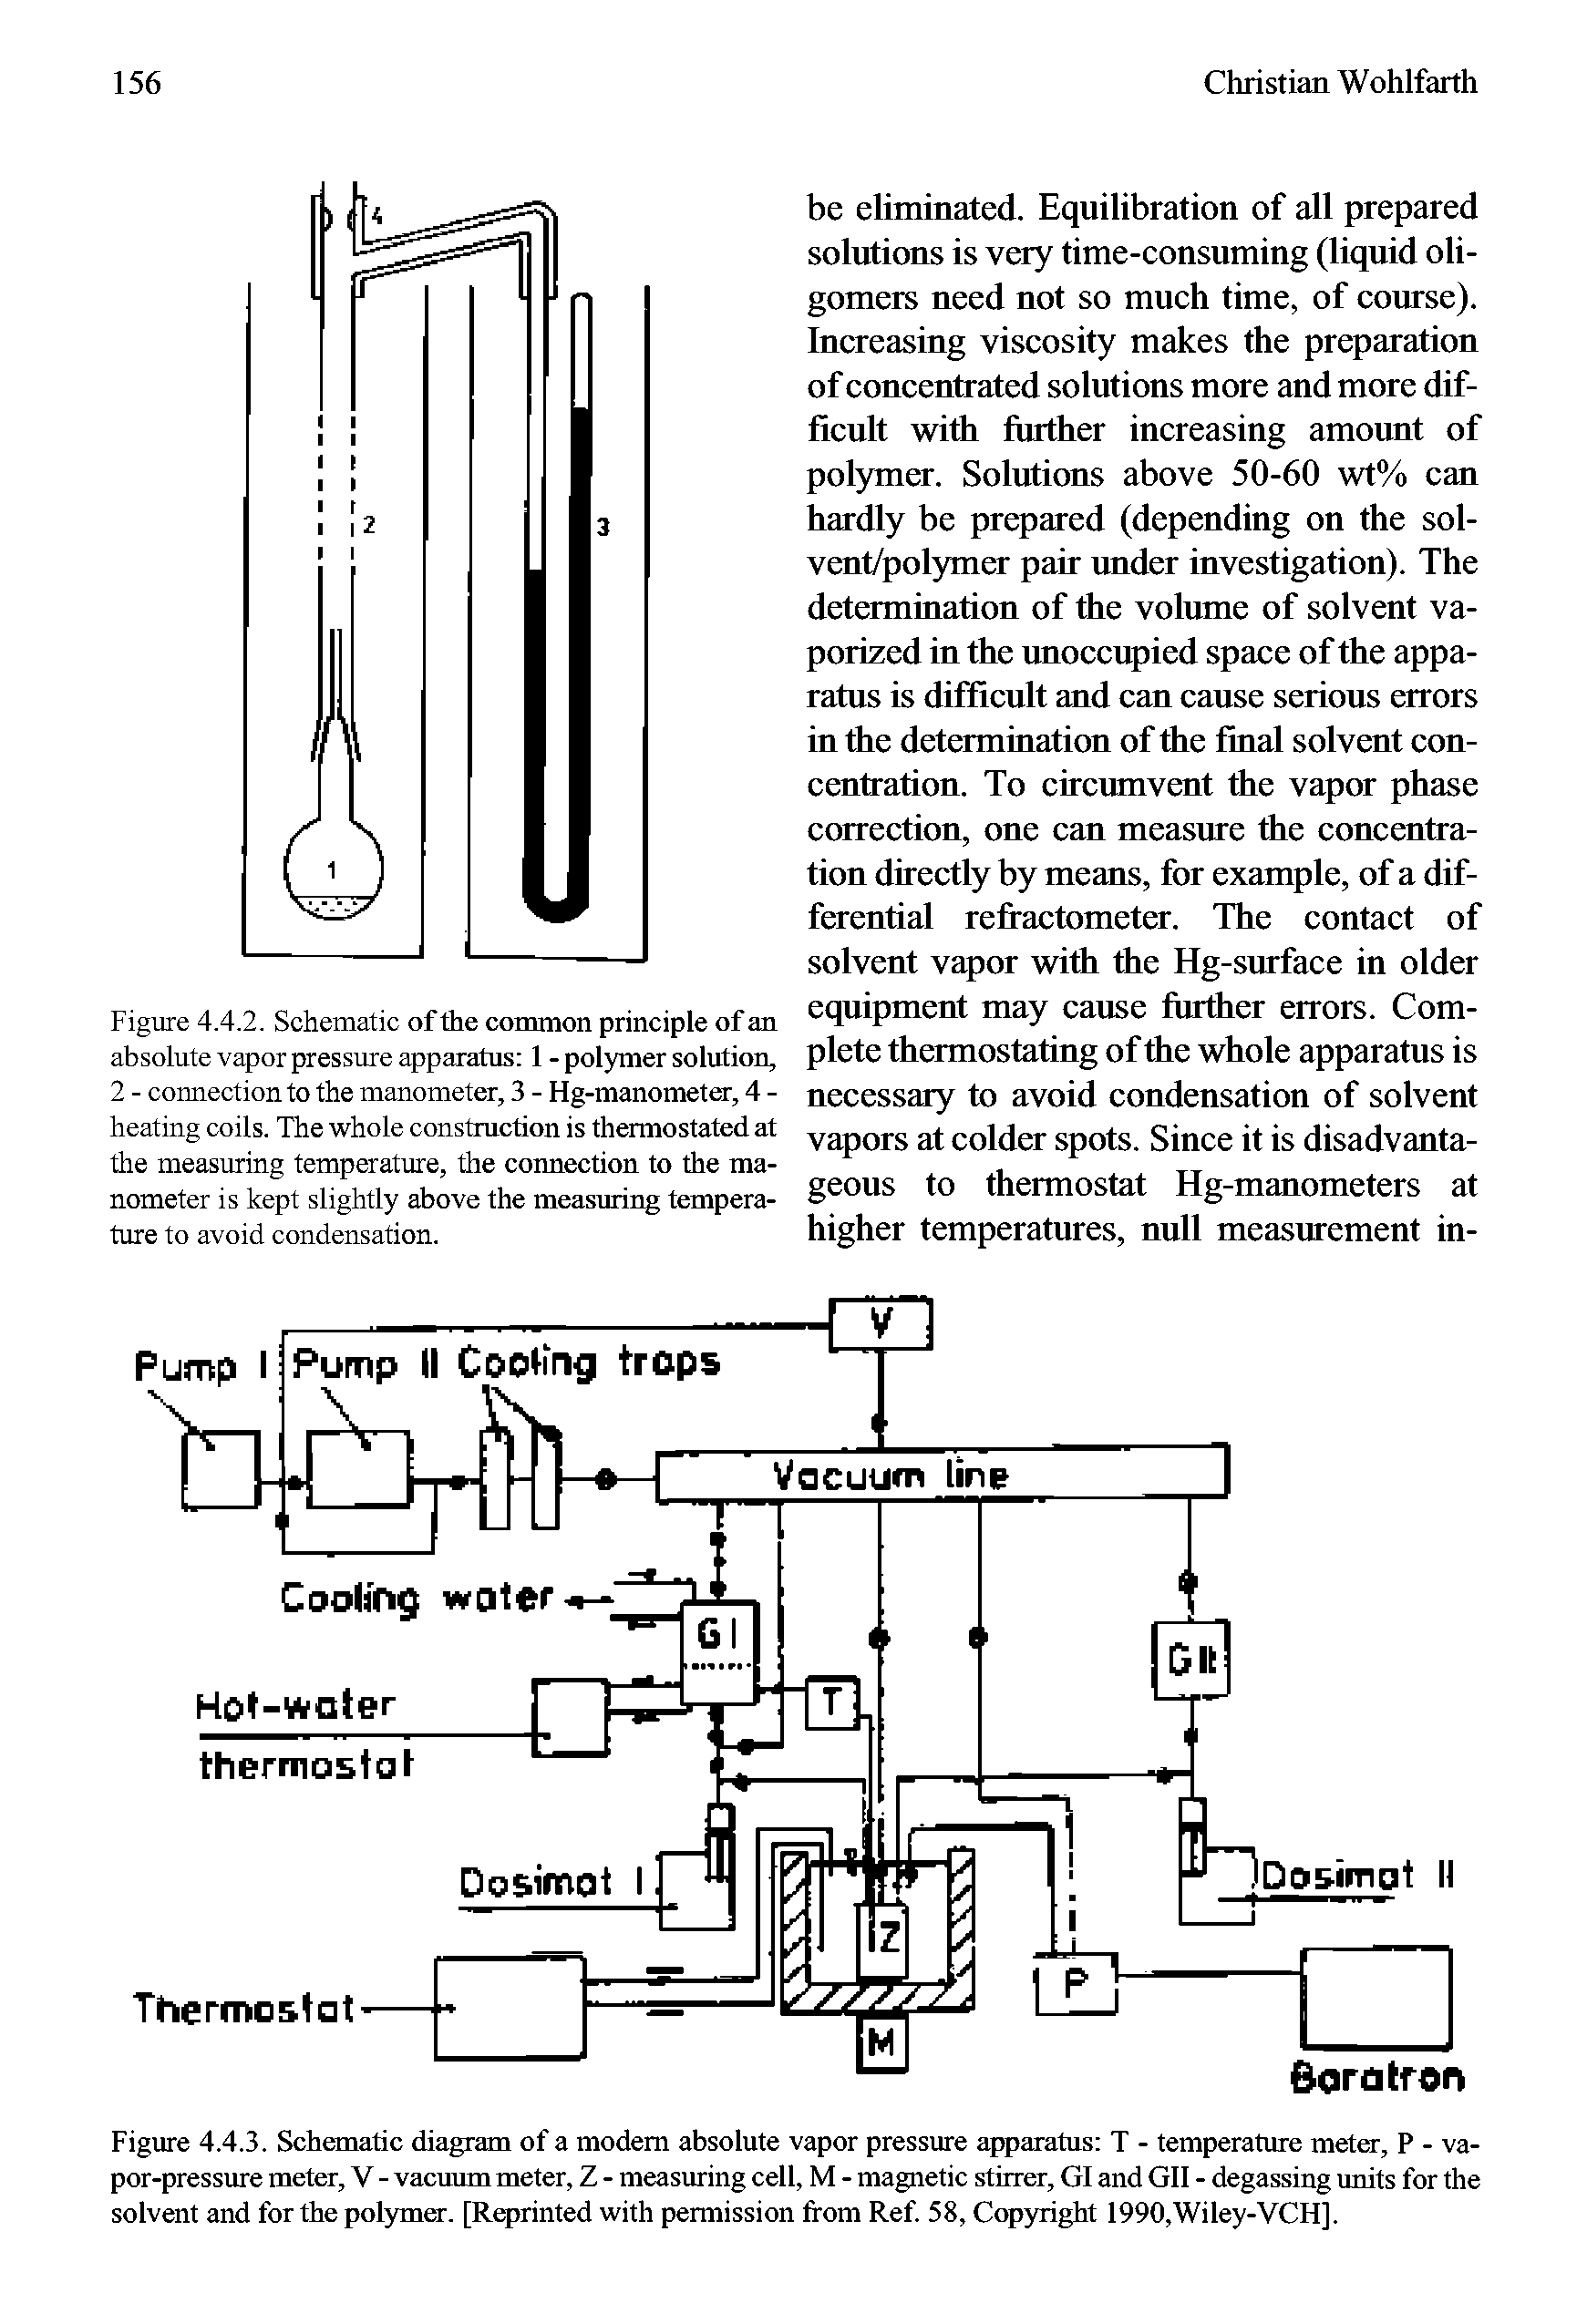 Figure 4.4.2. Schematic of the common principle of an absolute vapor pressure apparatus 1 - polymer solution, 2 - connection to the manometer, 3 - Hg-manometer, 4 -heating coils. The whole construction is thermostatedat the measuring temperature, the connection to the manometer is kept slightly above the measuring temperature to avoid condensation.